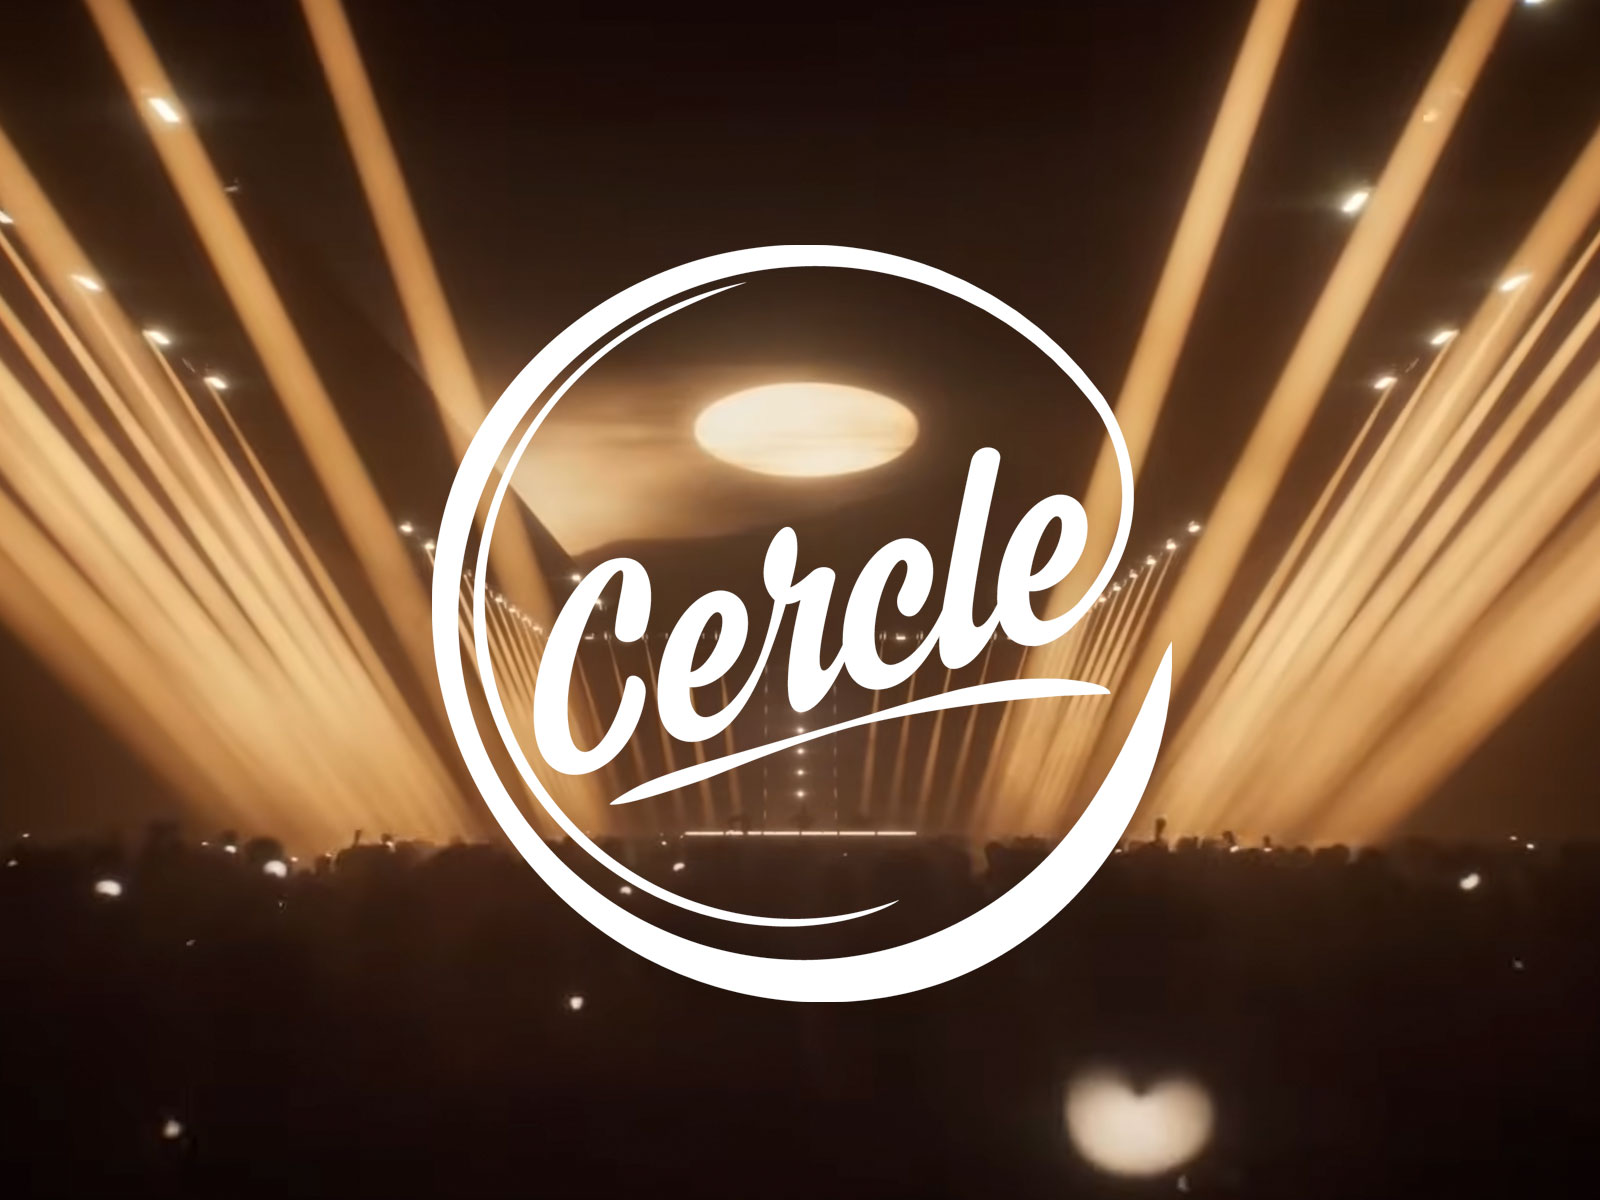 Cercle Introduce 360° Concert Series with Immersive "Odyssey" Concept - OZ EDM